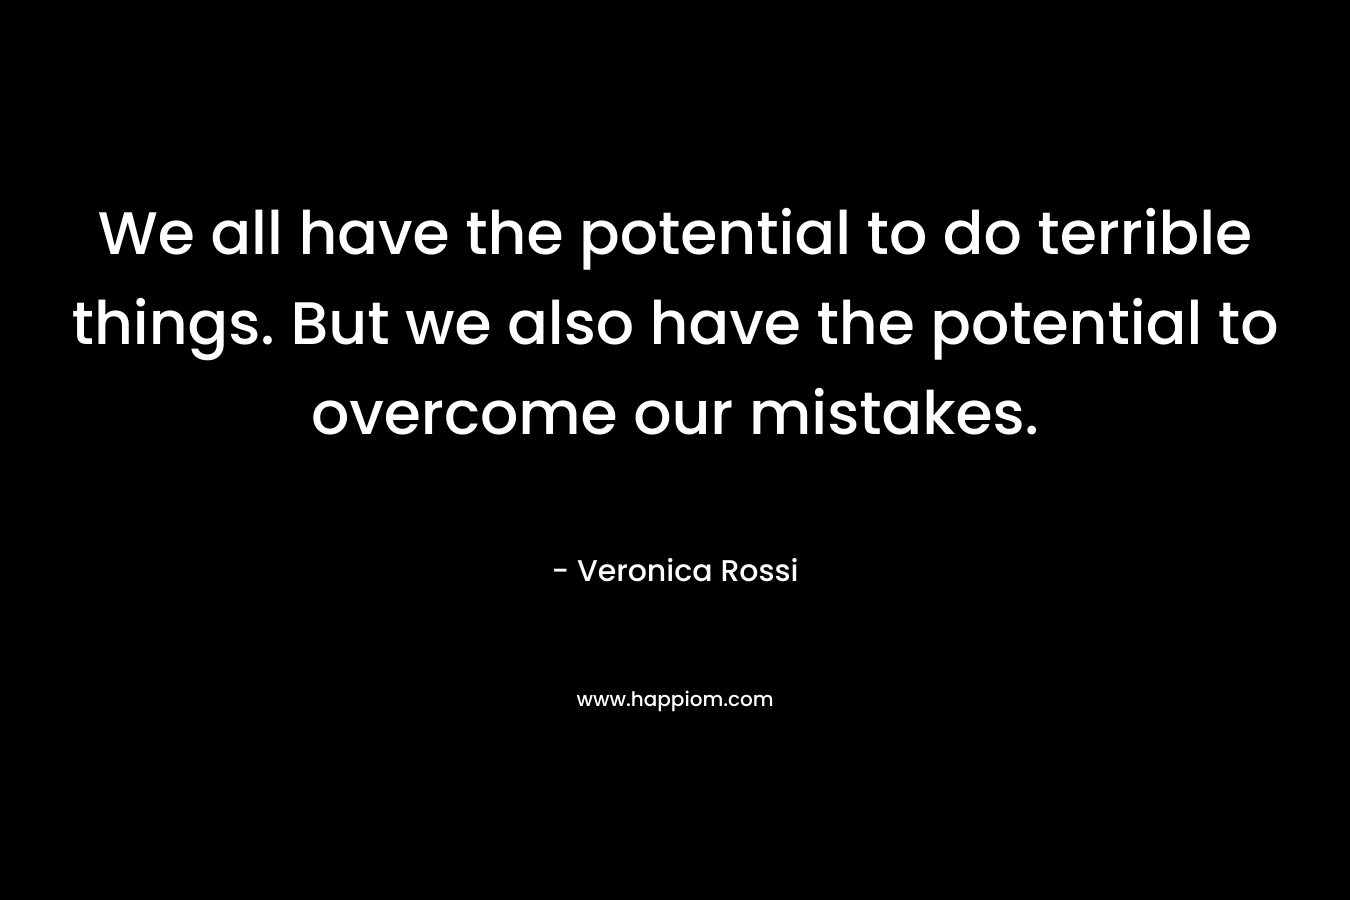 We all have the potential to do terrible things. But we also have the potential to overcome our mistakes. – Veronica Rossi